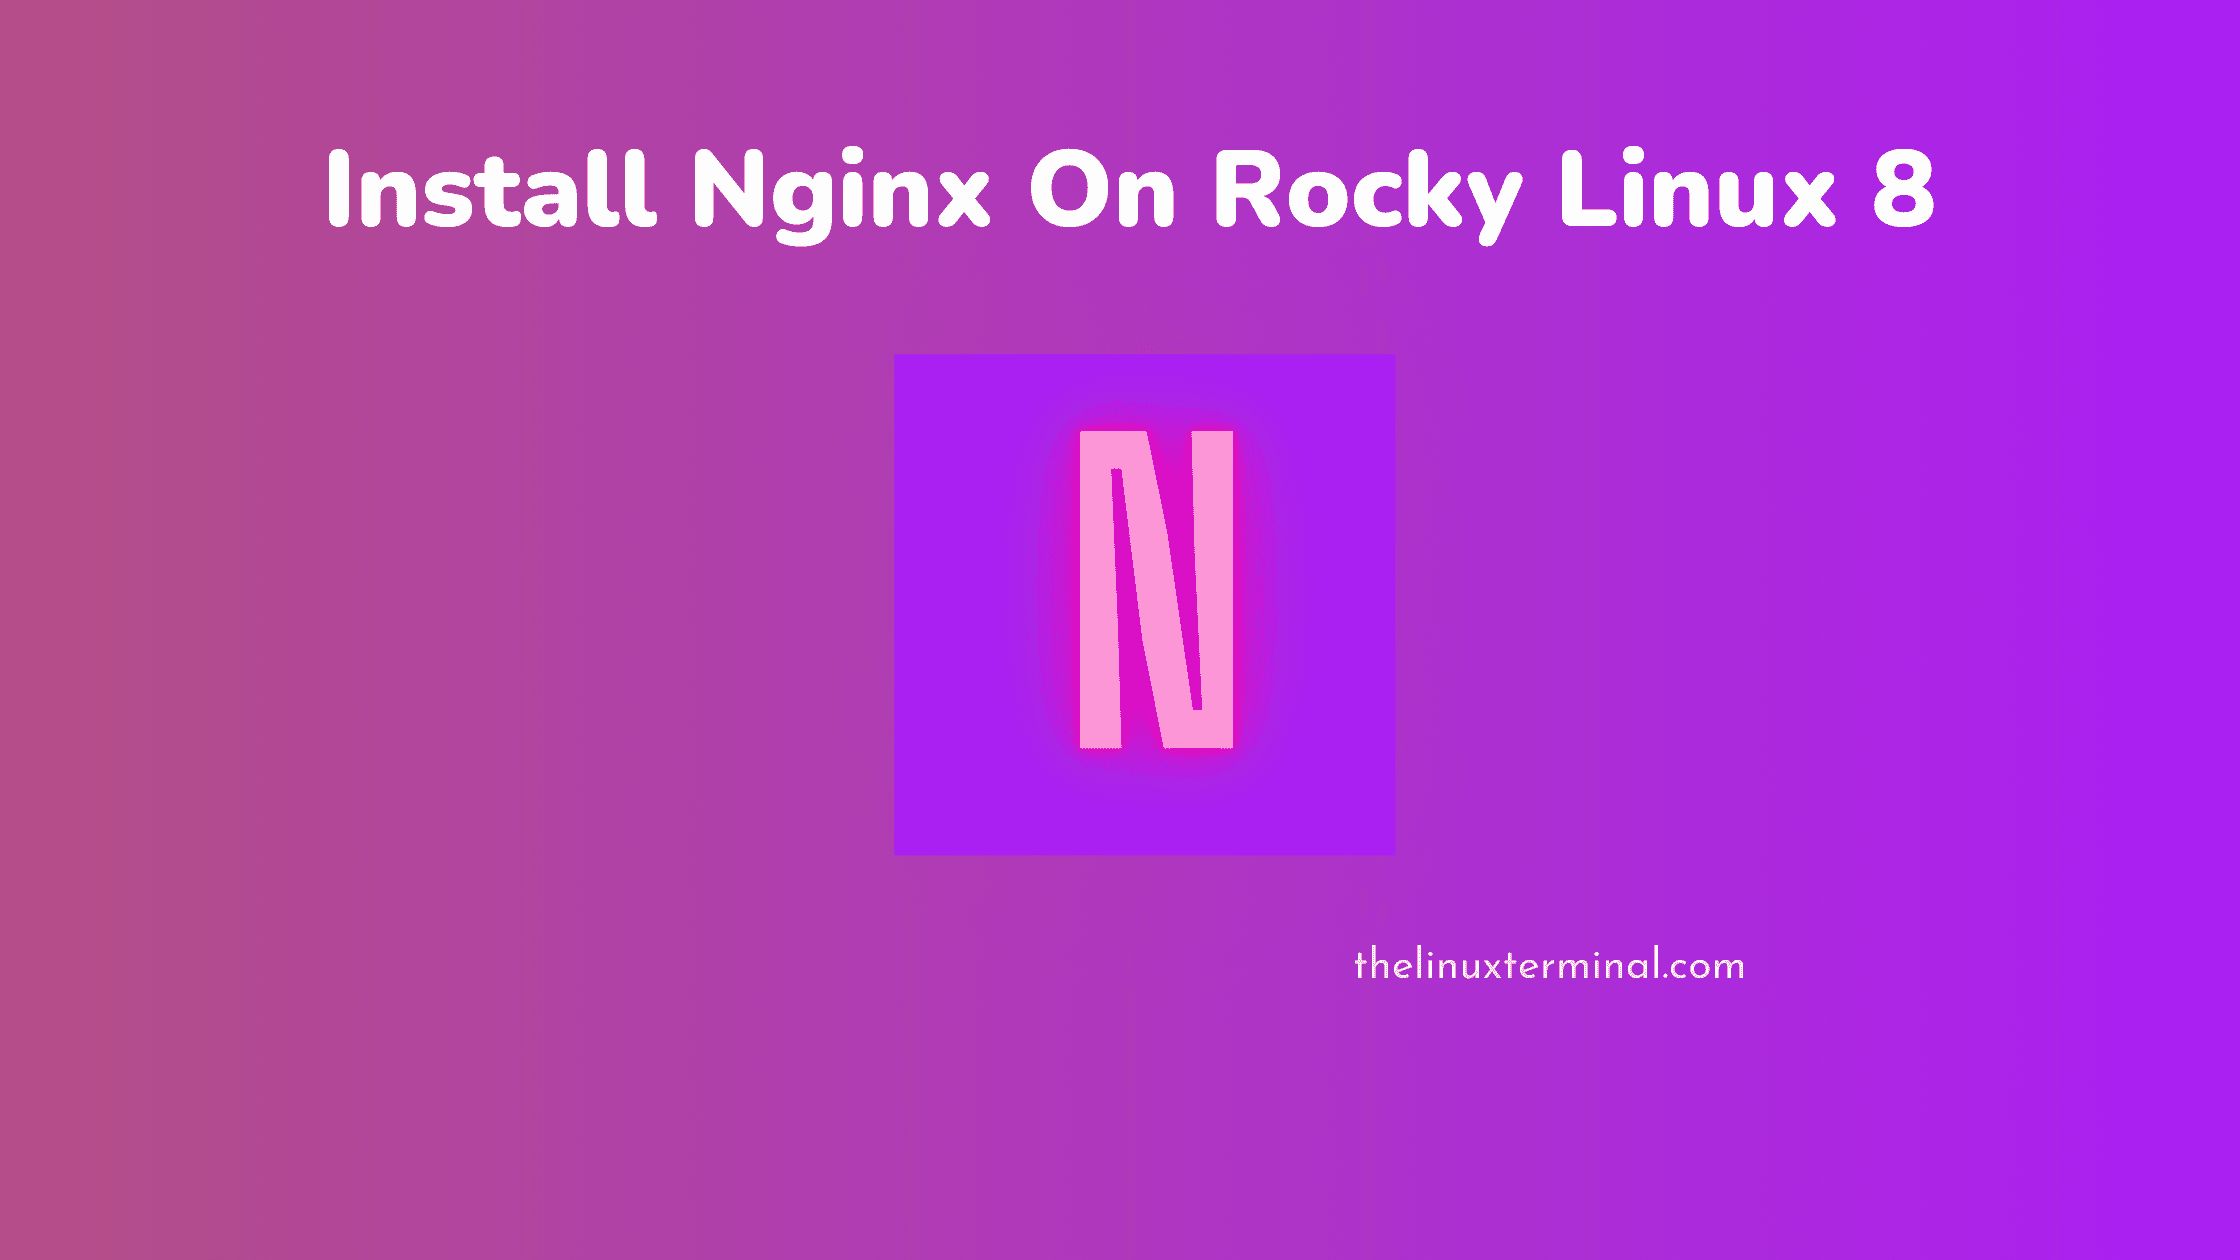 How to Install Nginx On Rocky Linux 